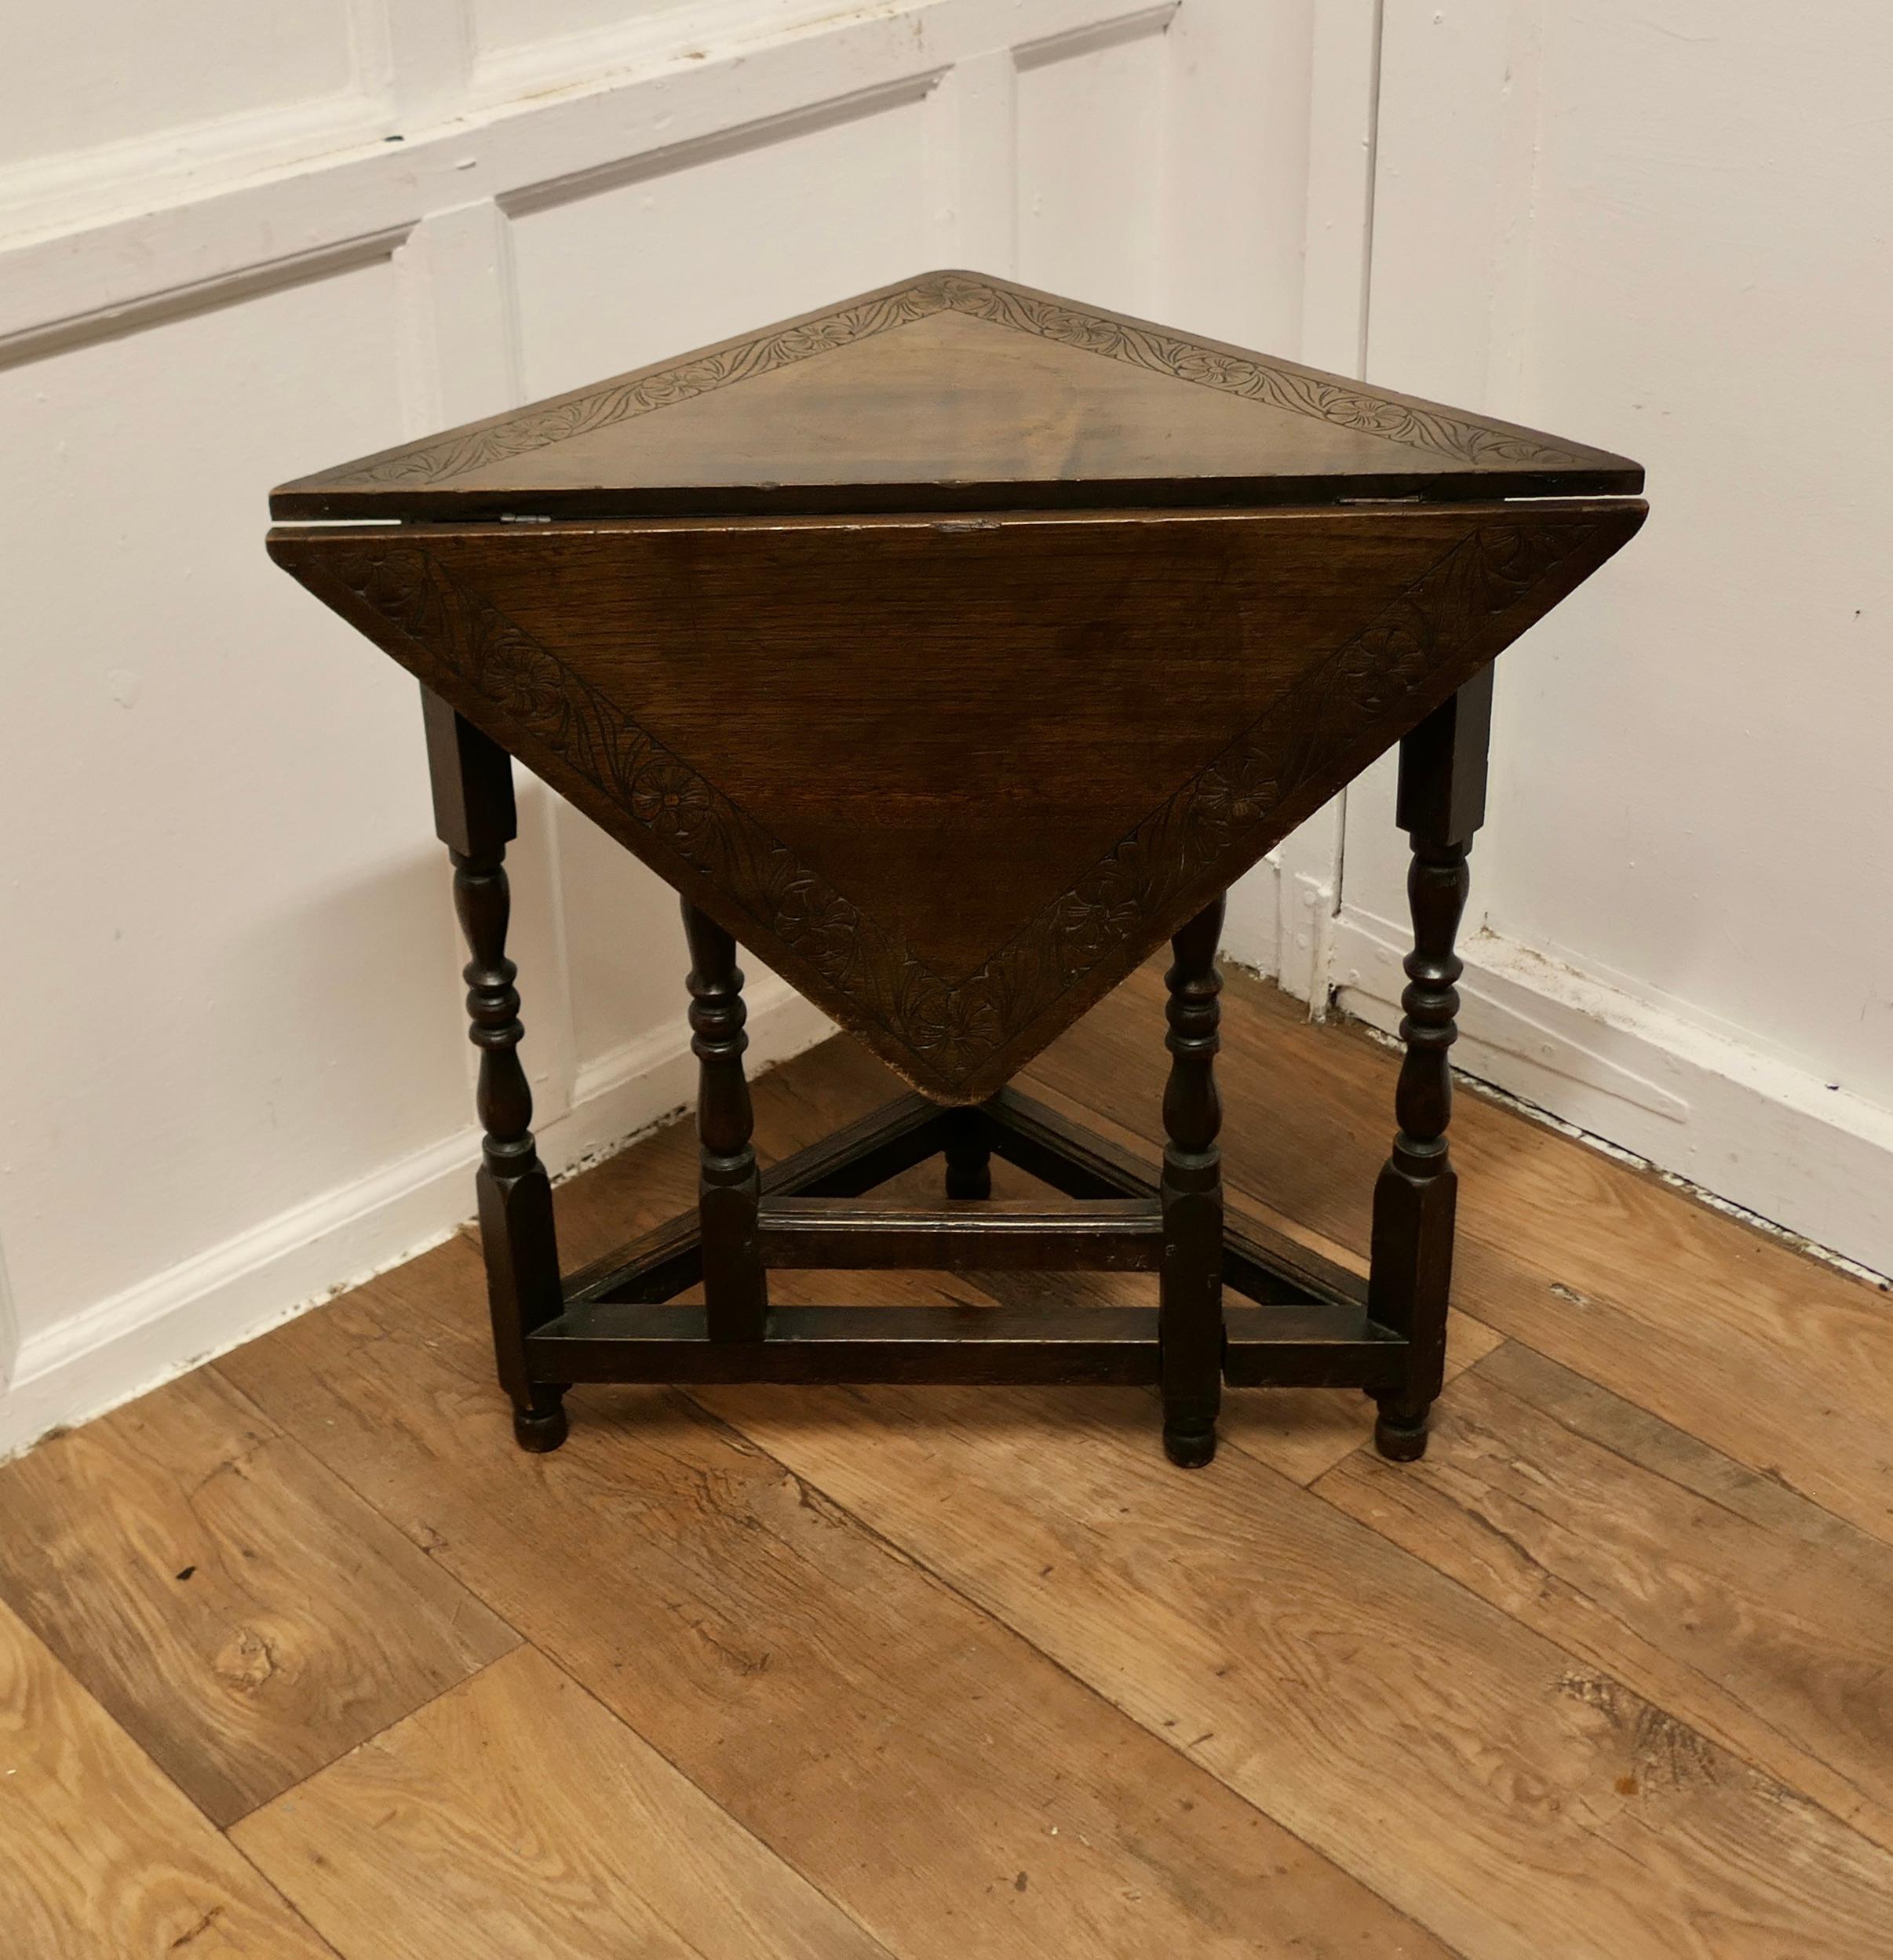 Carved Oak Triangular Gate Leg Side Table

A pretty and very useful little piece, this is a corner table with a drop flap and a gate support
The table top has a carved border and turned legs it is in good sound condition with a few old bumps
The